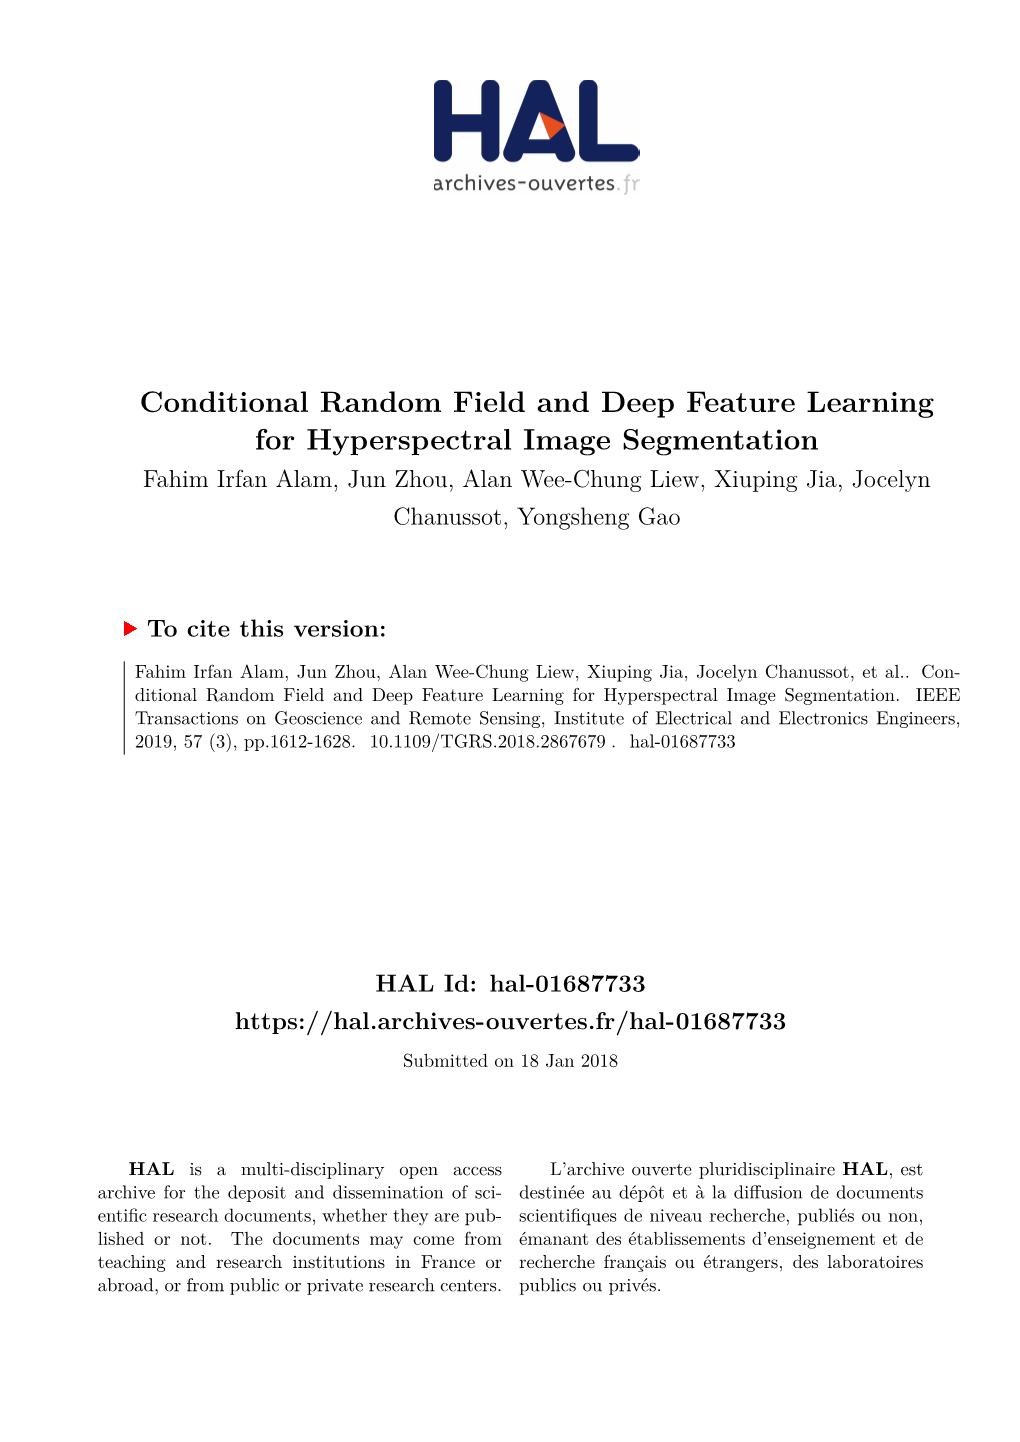 Conditional Random Field and Deep Feature Learning for Hyperspectral